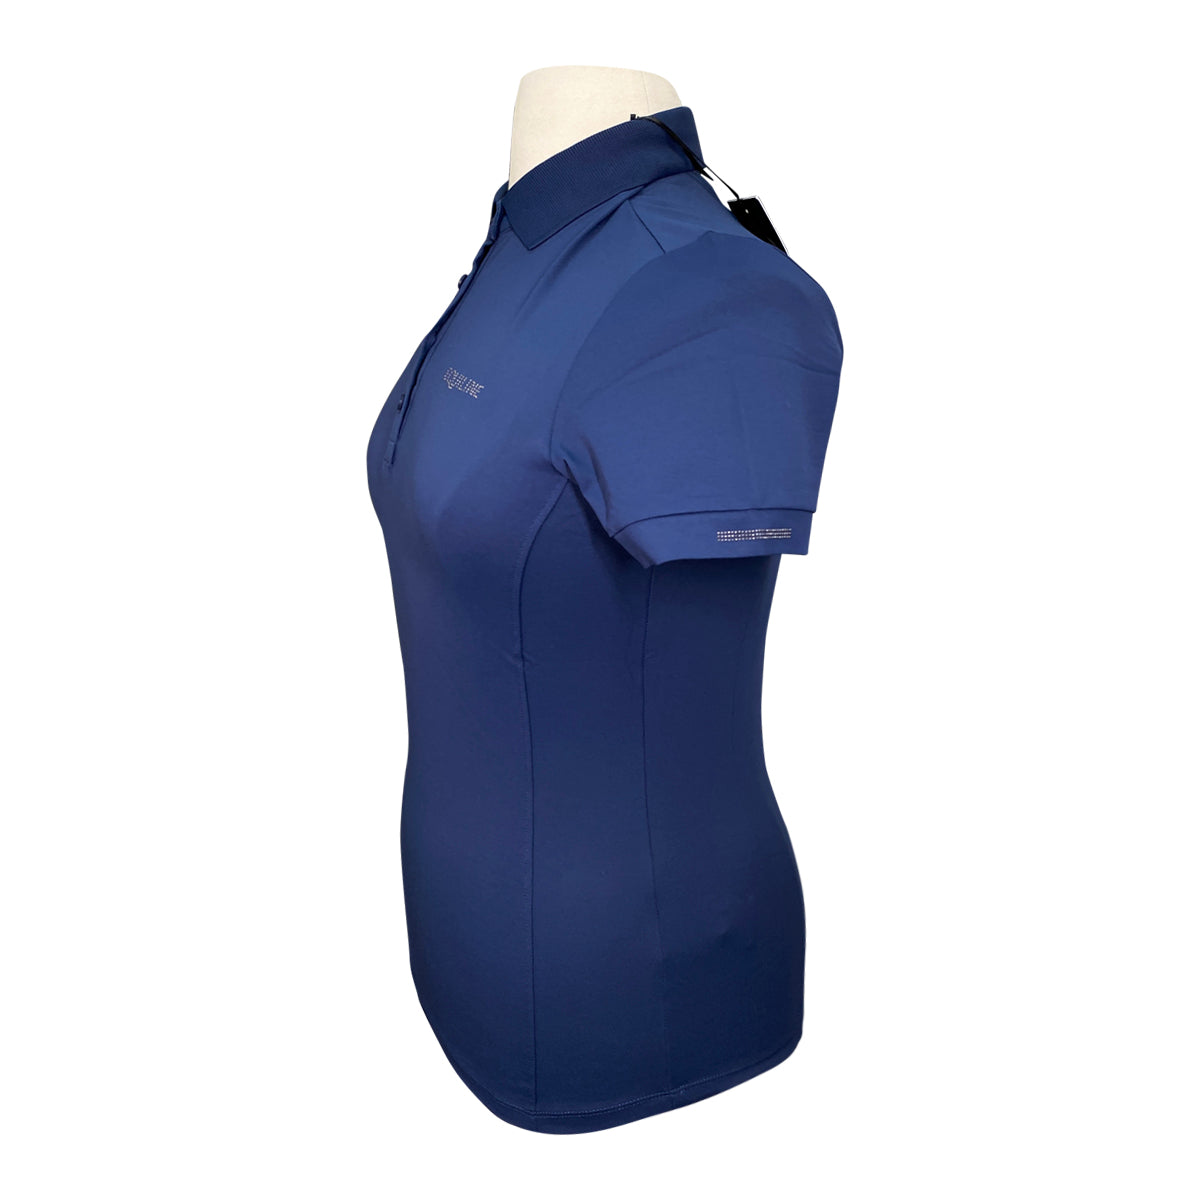 Equiline &#39;Evae&#39; Short Sleeve Polo Shirt in Diplomatic Blue - Women&#39;s Large